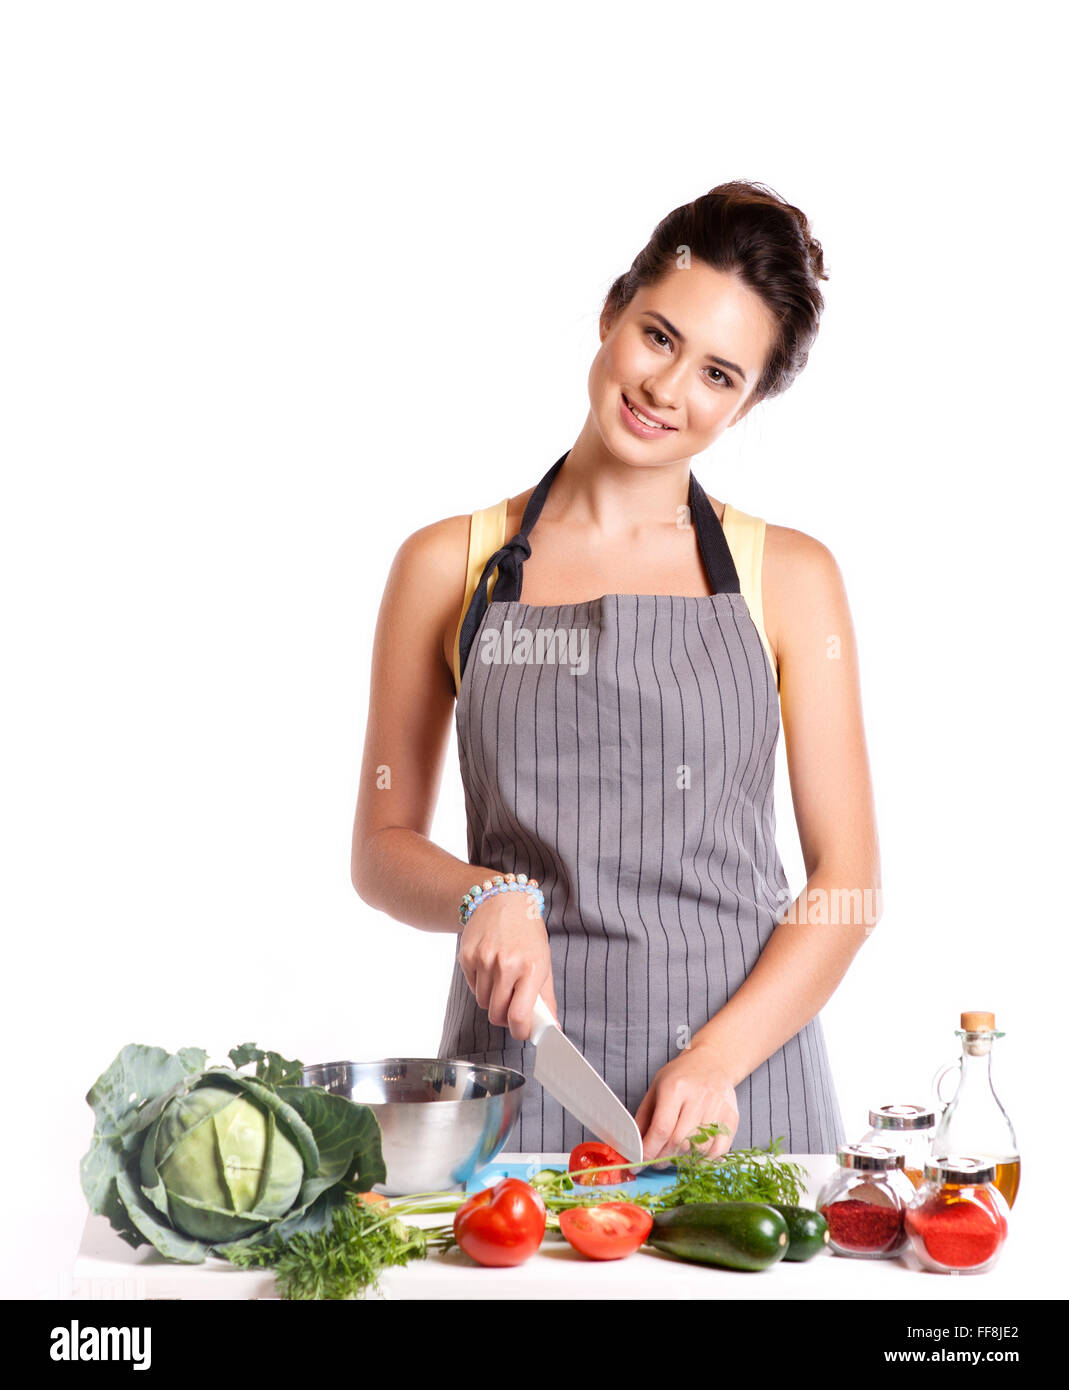 Young Woman Cooking. Healthy Food - Vegetable Salad. Diet. Dieting Concept. Healthy Lifestyle. Cooking At Home. Prepare Food. Stock Photo